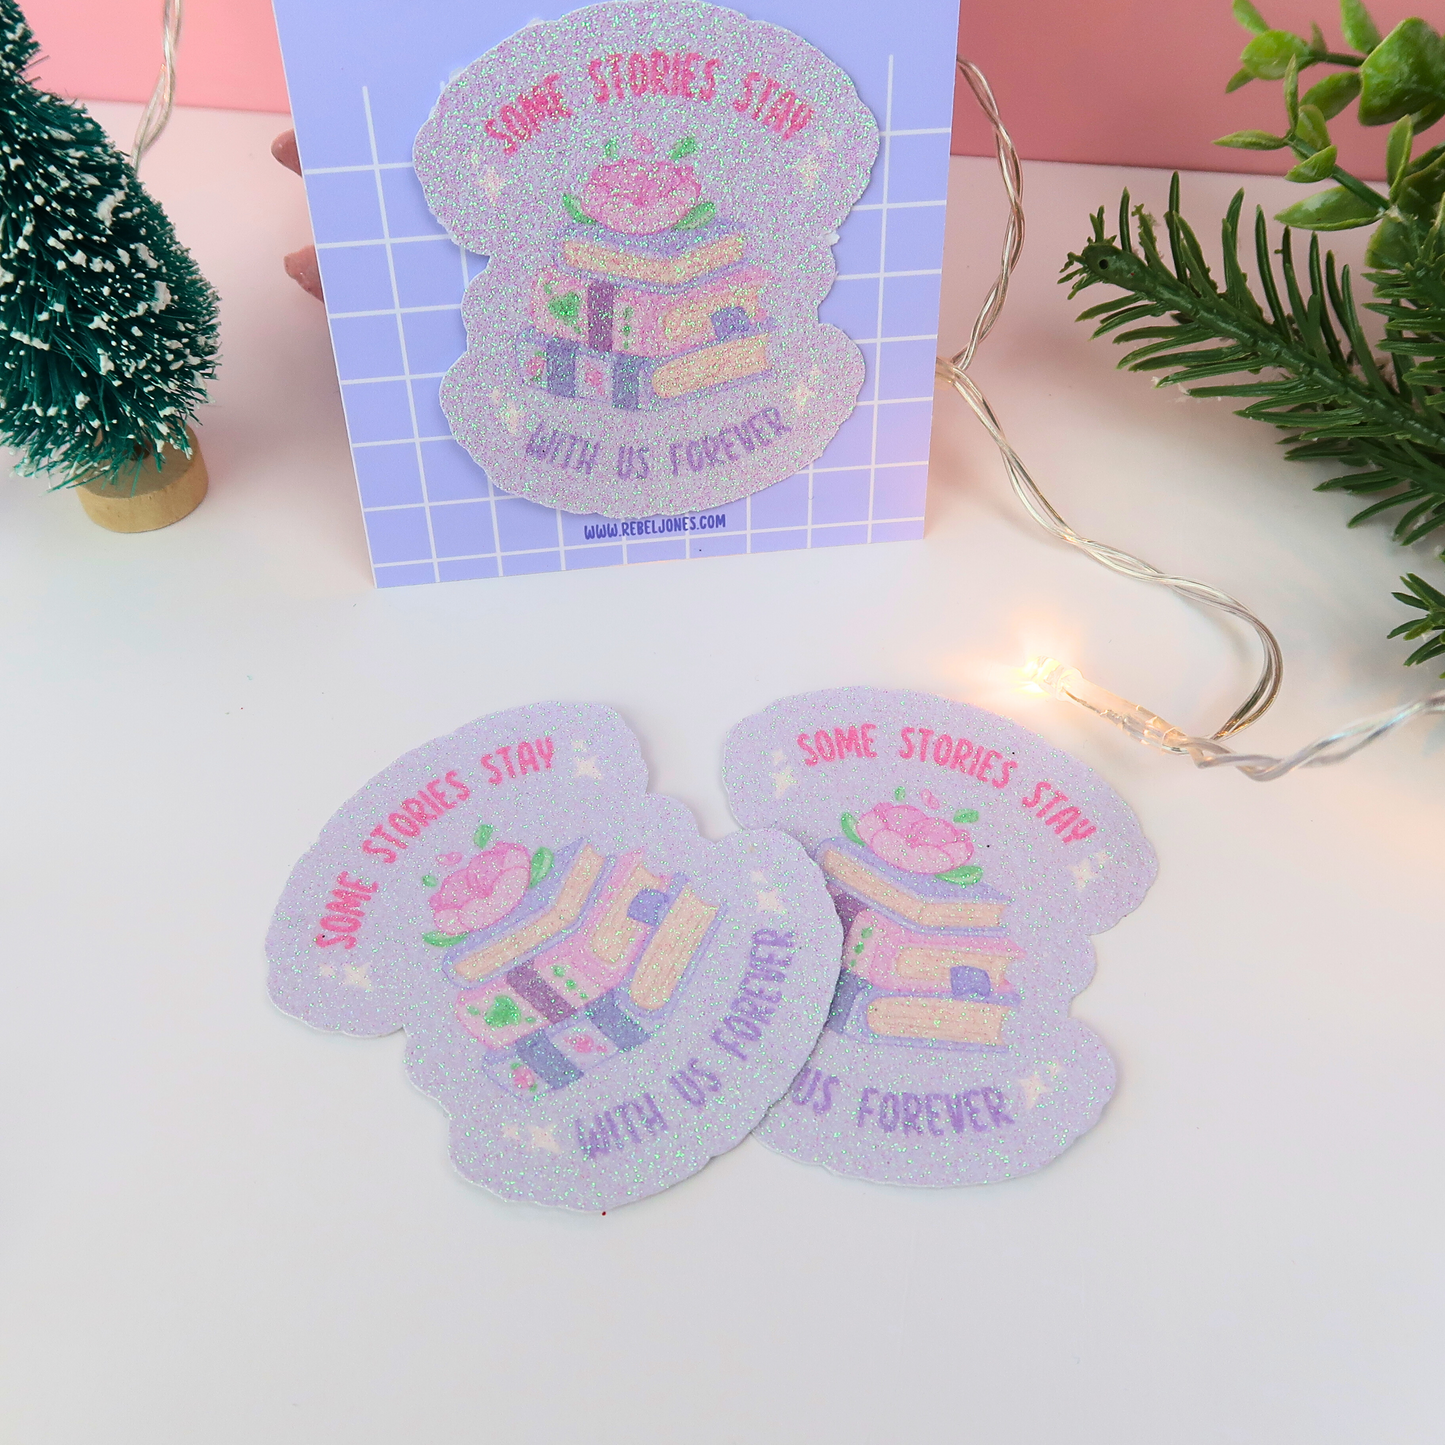 Some Stories Stay With us Forever - Glitter Sticker